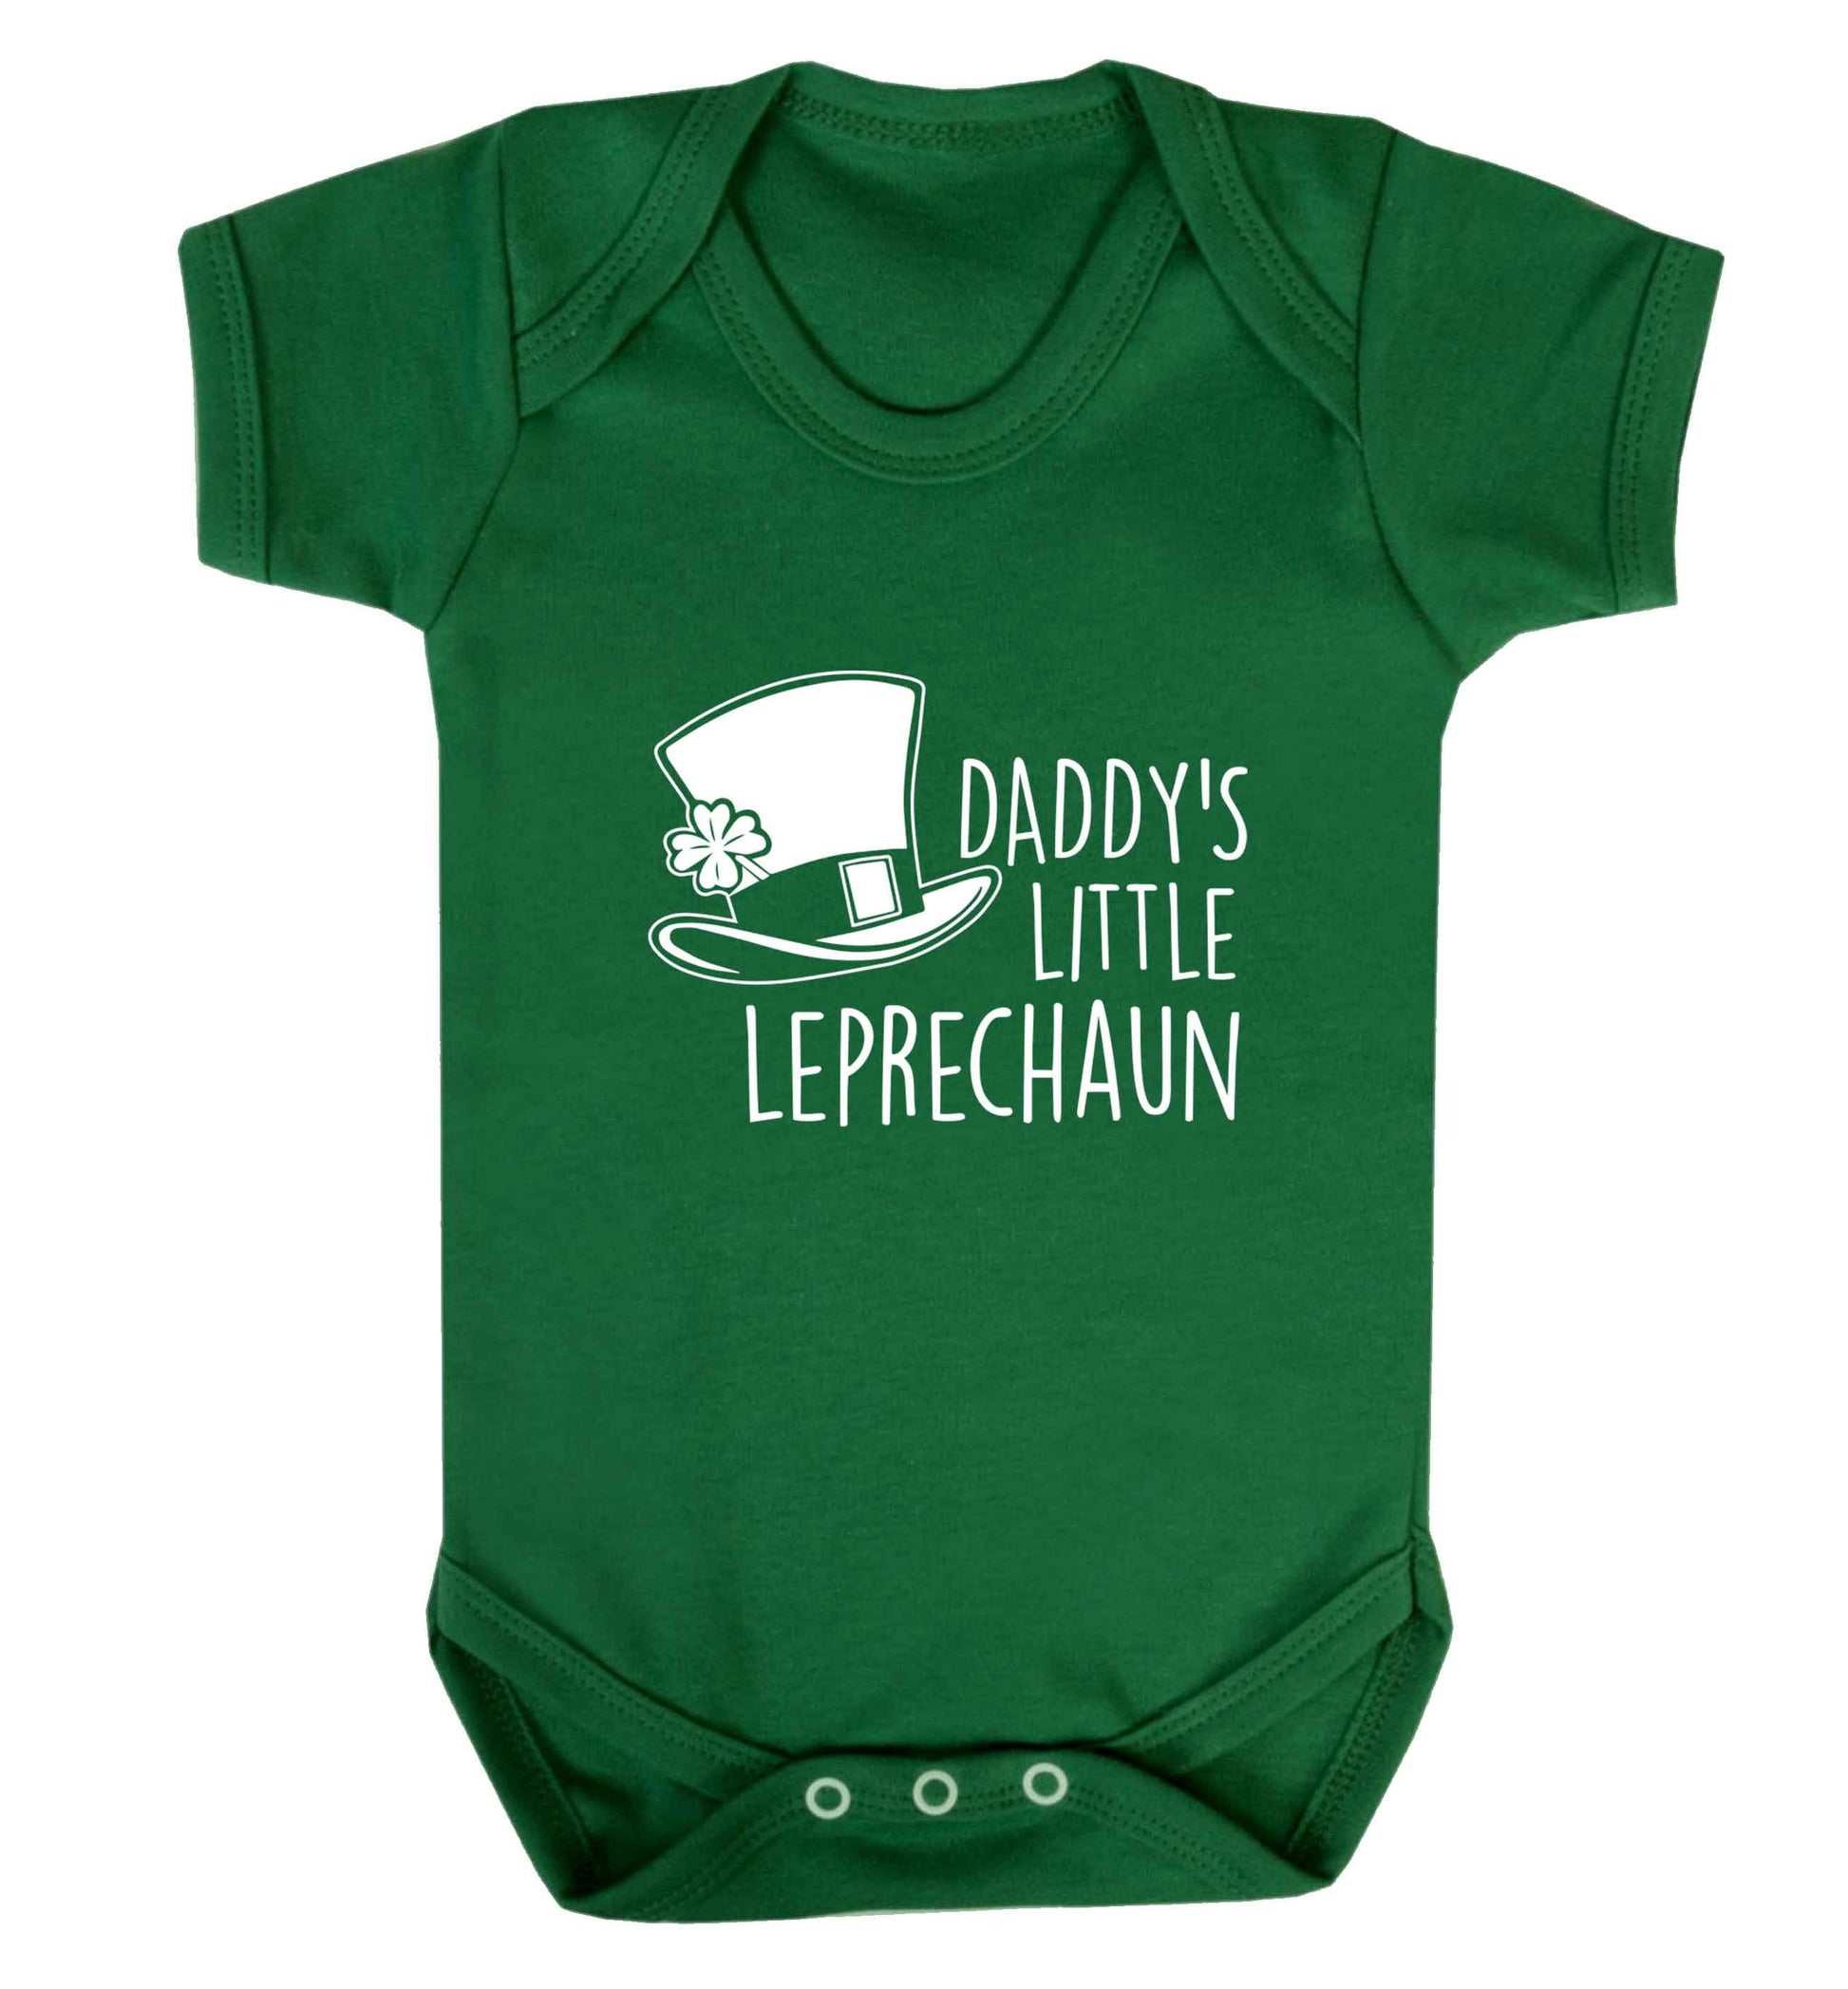 Daddy's lucky charm baby vest green 18-24 months